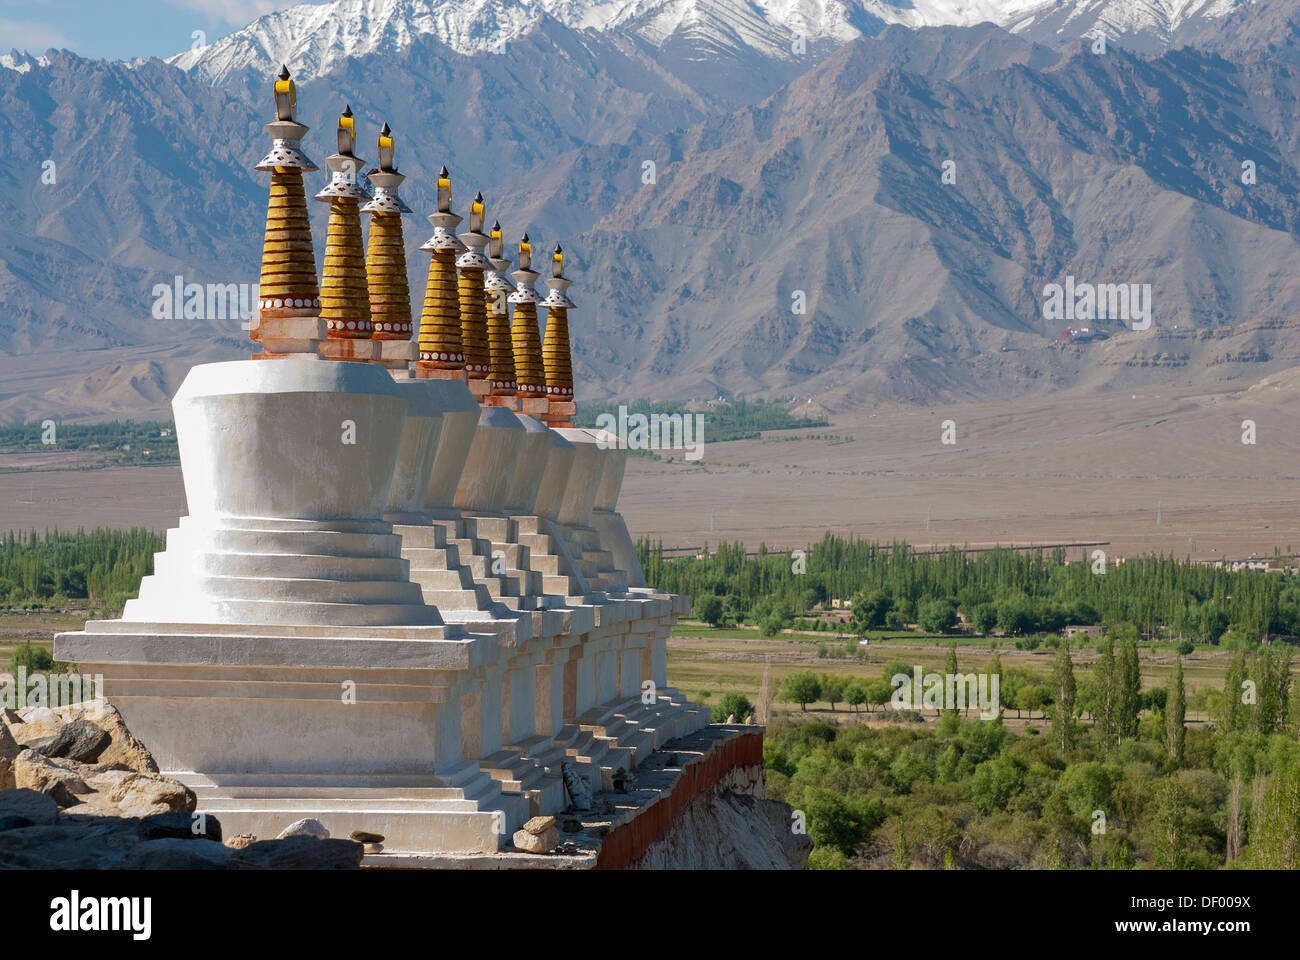 India, Jammu & Kashmir, Ladakh, white chortens with gold spires overlooking a valley near Shey Palace Stock Photo